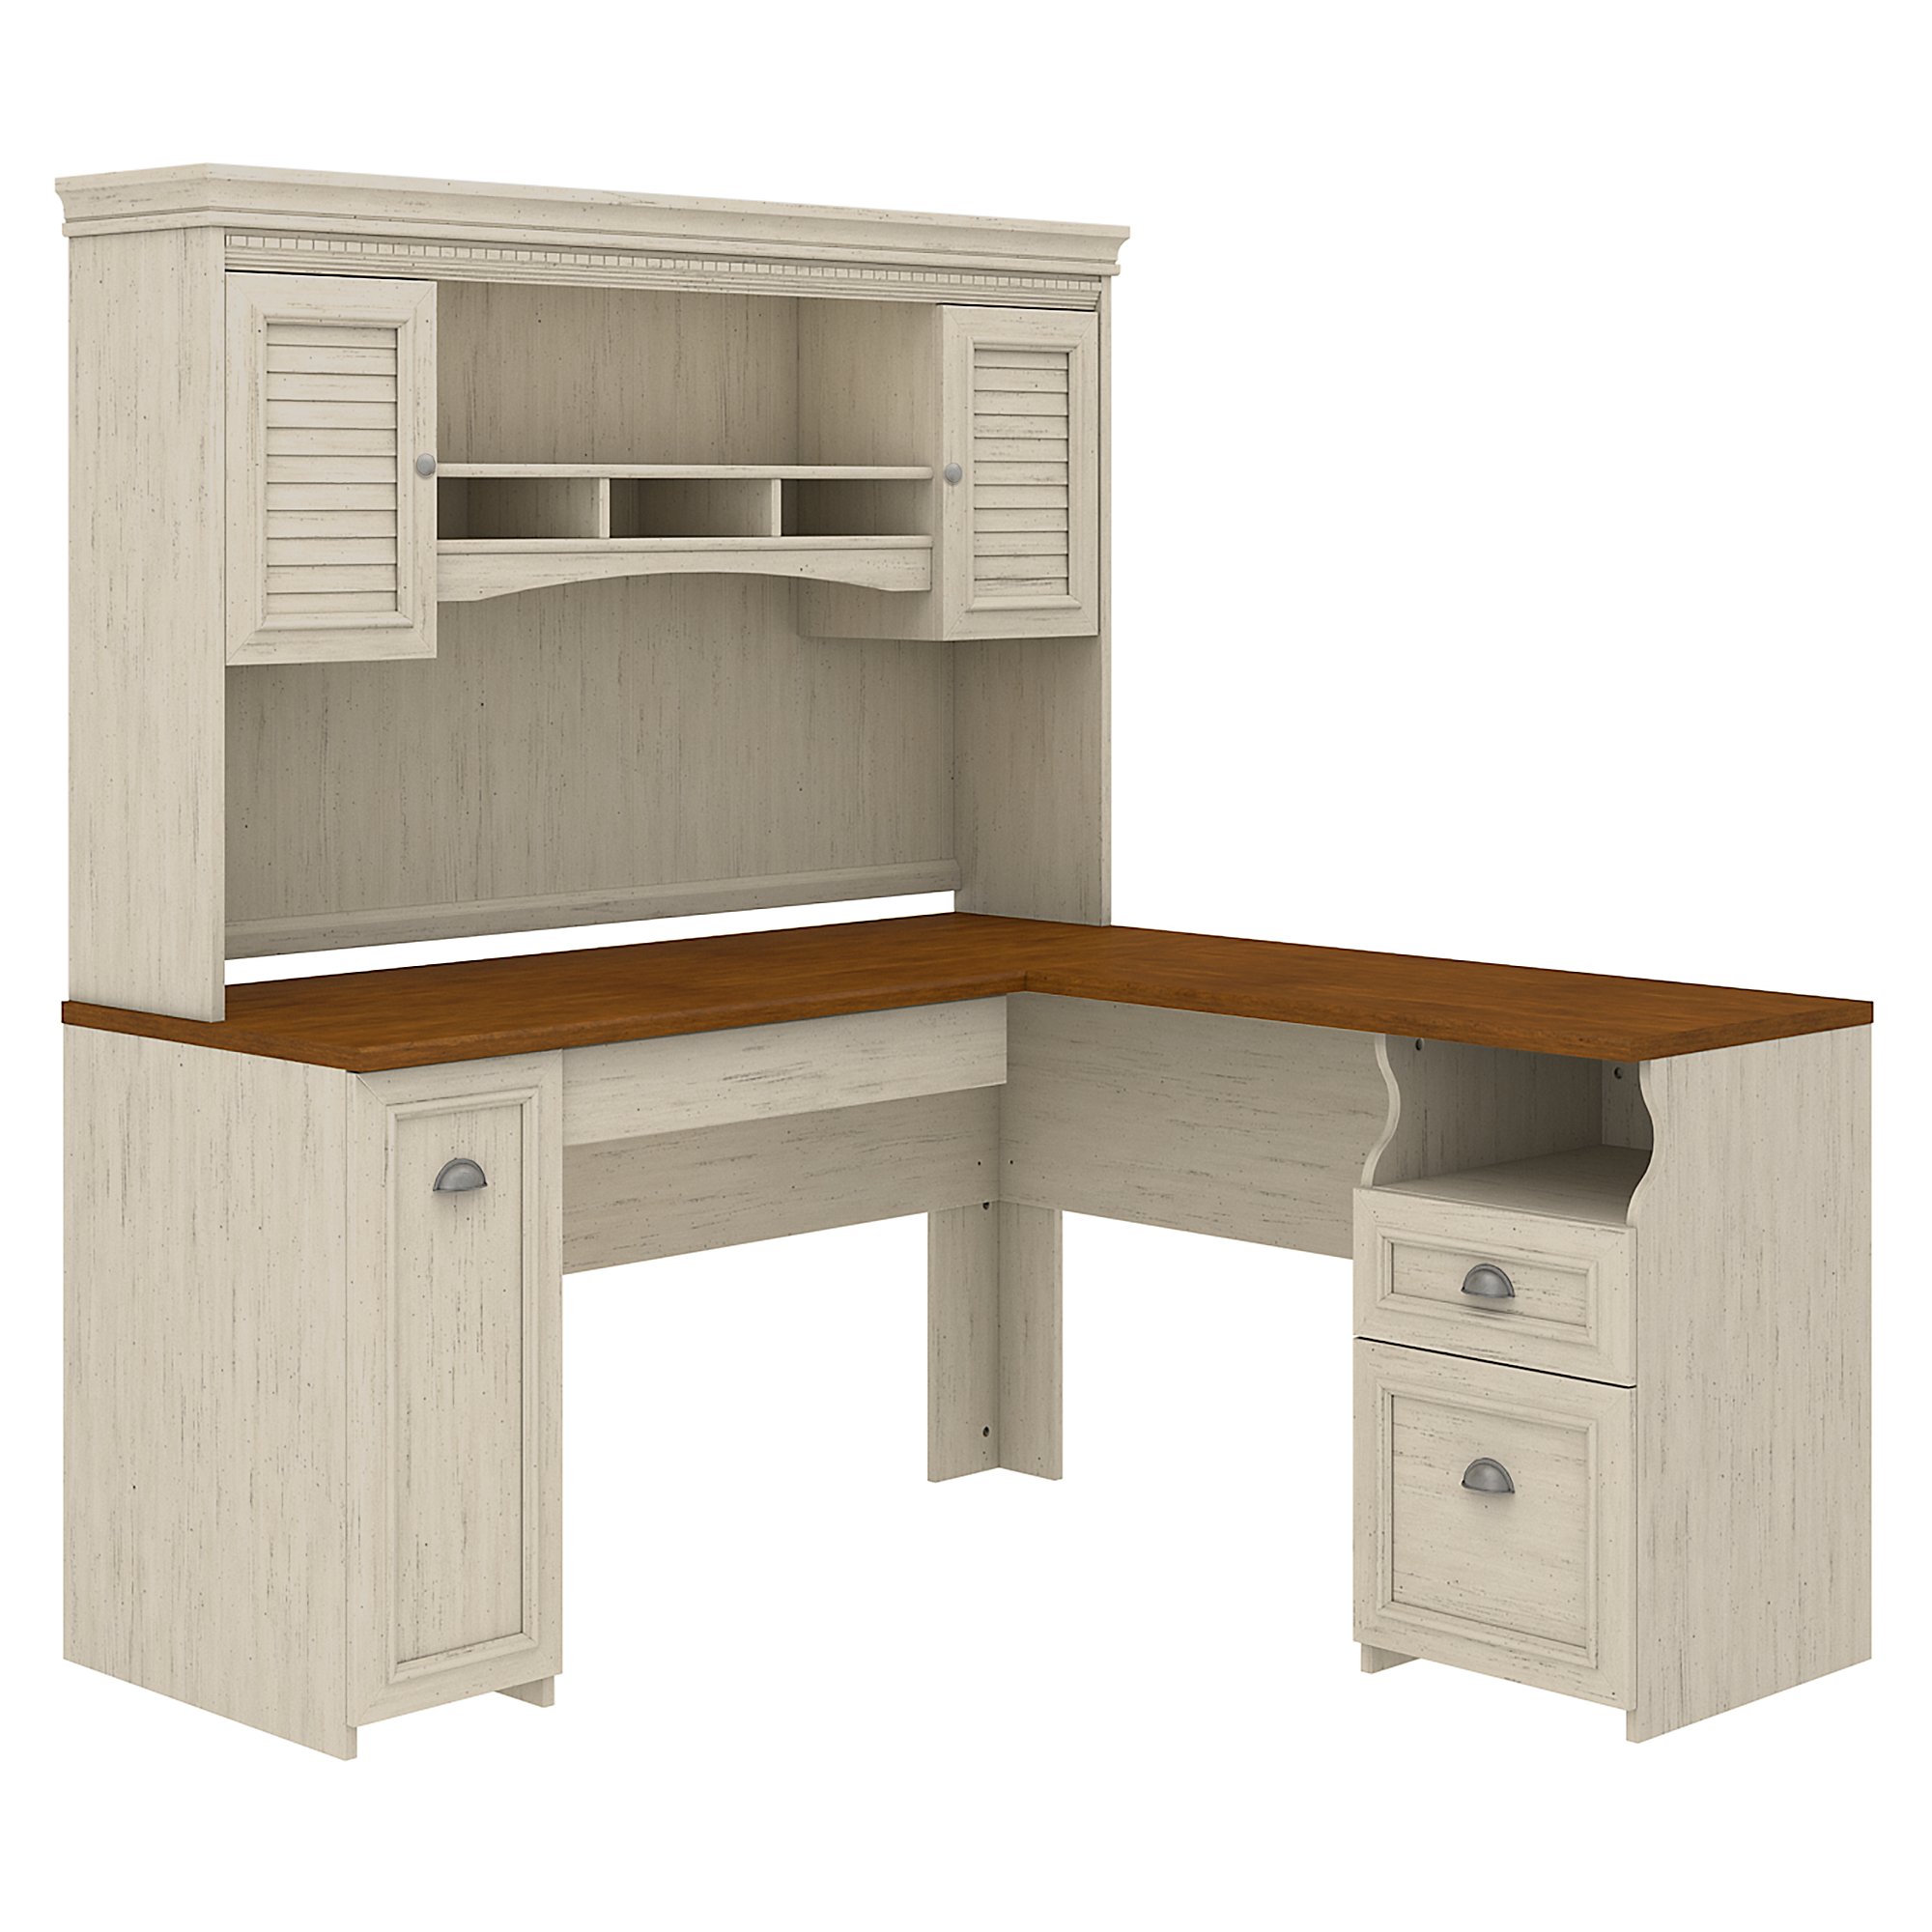 Bush Furniture Fairview L Shaped Desk with Hutch in Antique White - image 1 of 9